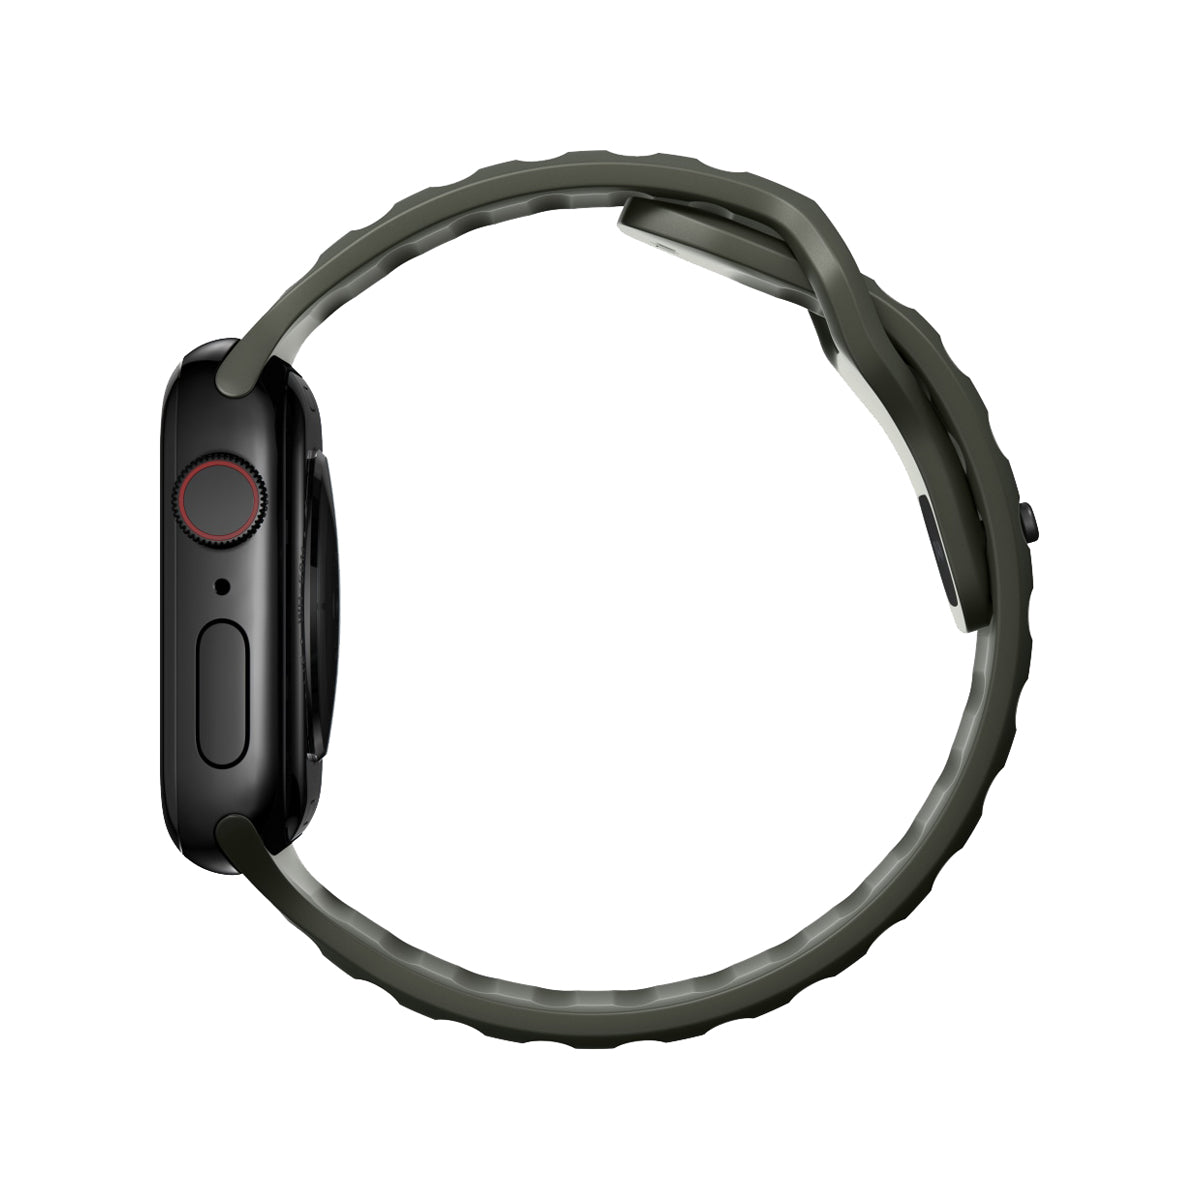 Nomad Apple Watch 45mm Sport Band - Ash Green.